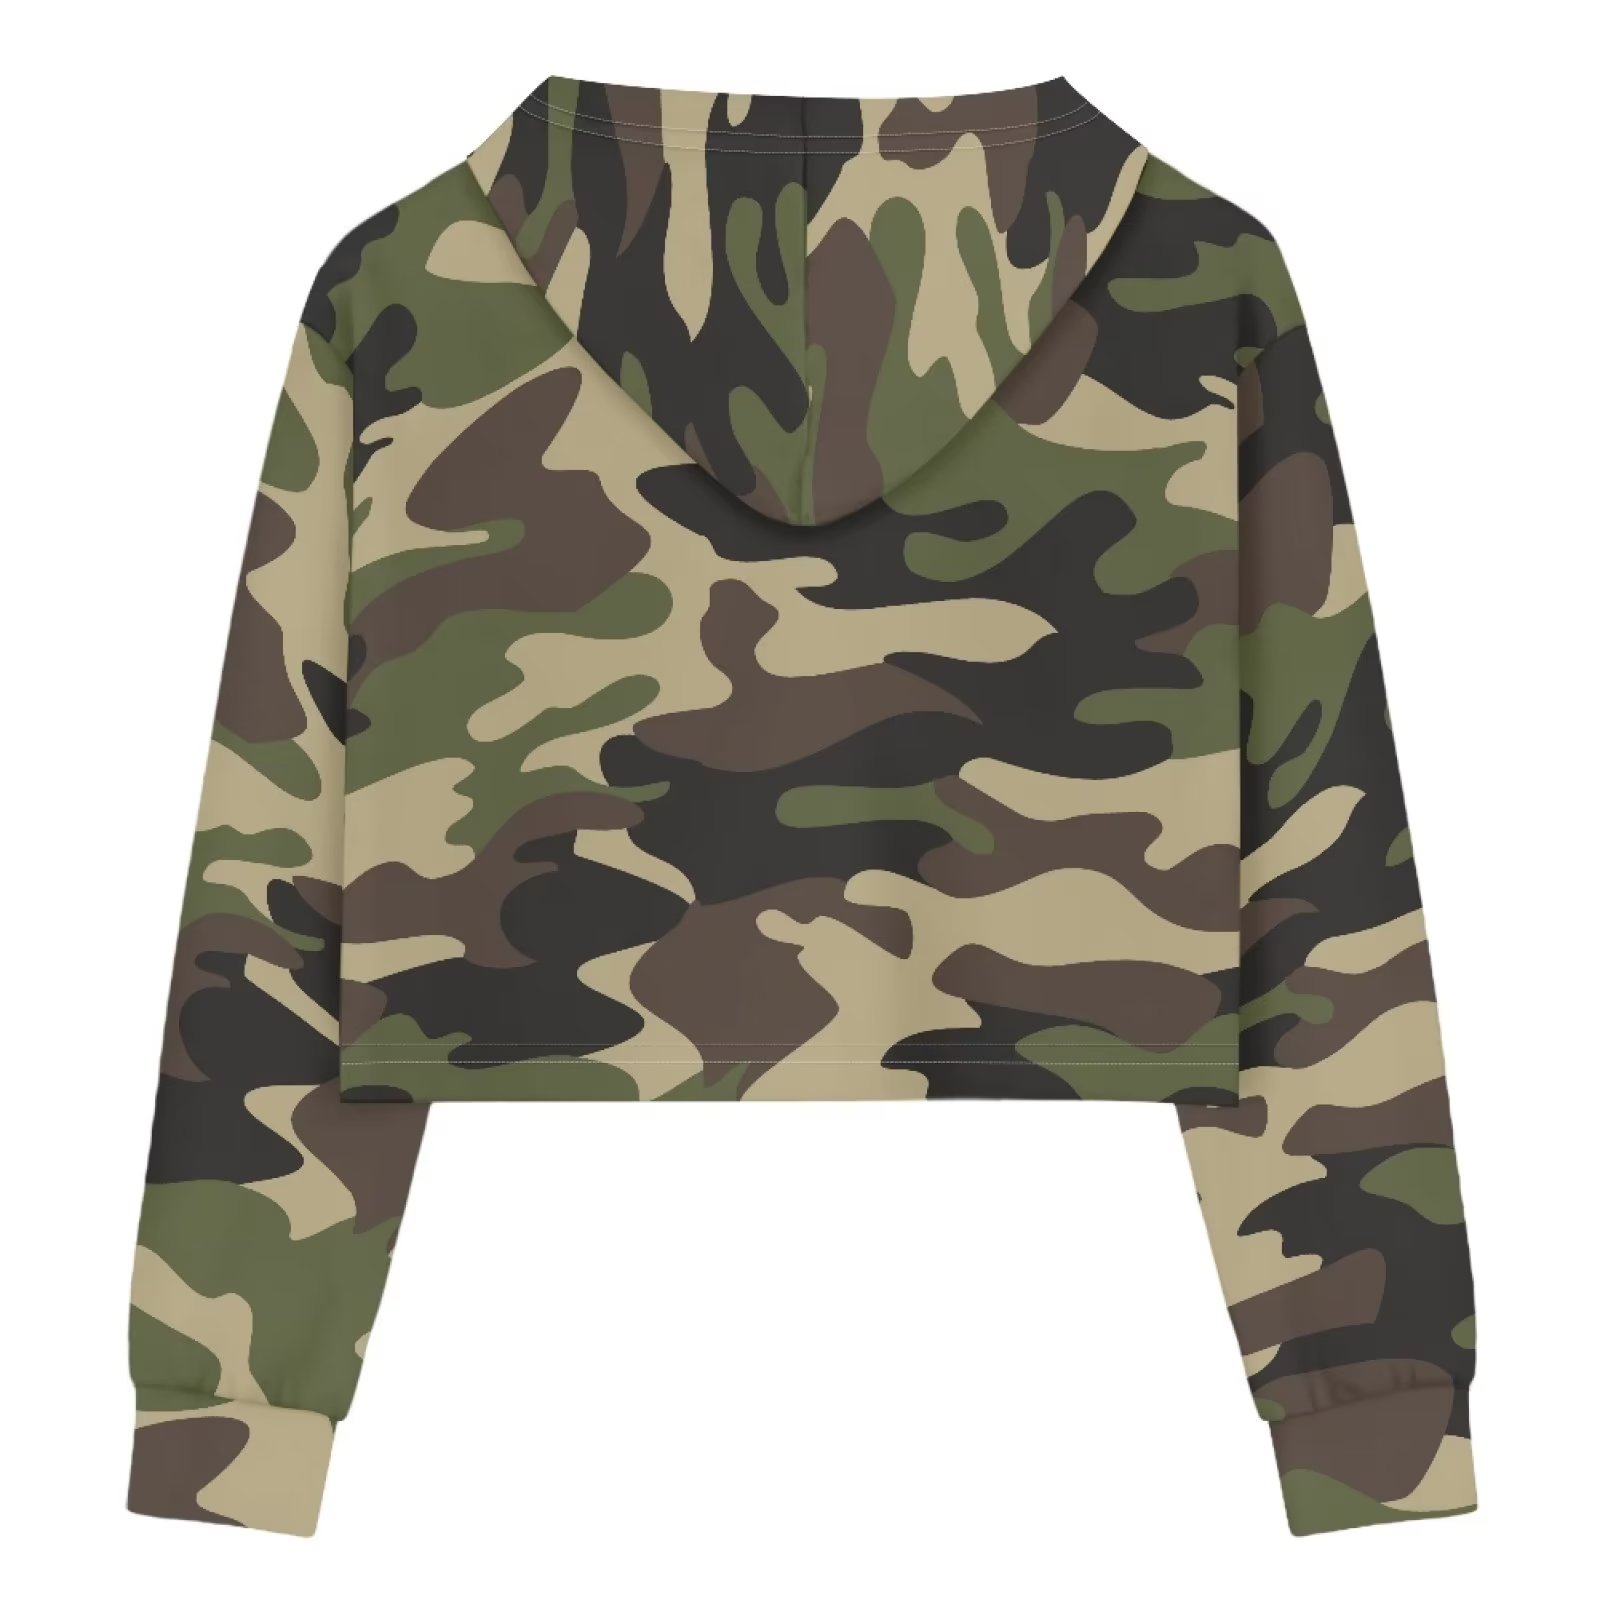 FKELYI Camo Hunting Army Crop Tops Hoodies Kids Size 9-10 Years Stretchy  Hiking Sweater with Hoodie Comfy Running Long Sleeve Pullover Tops for Girls  